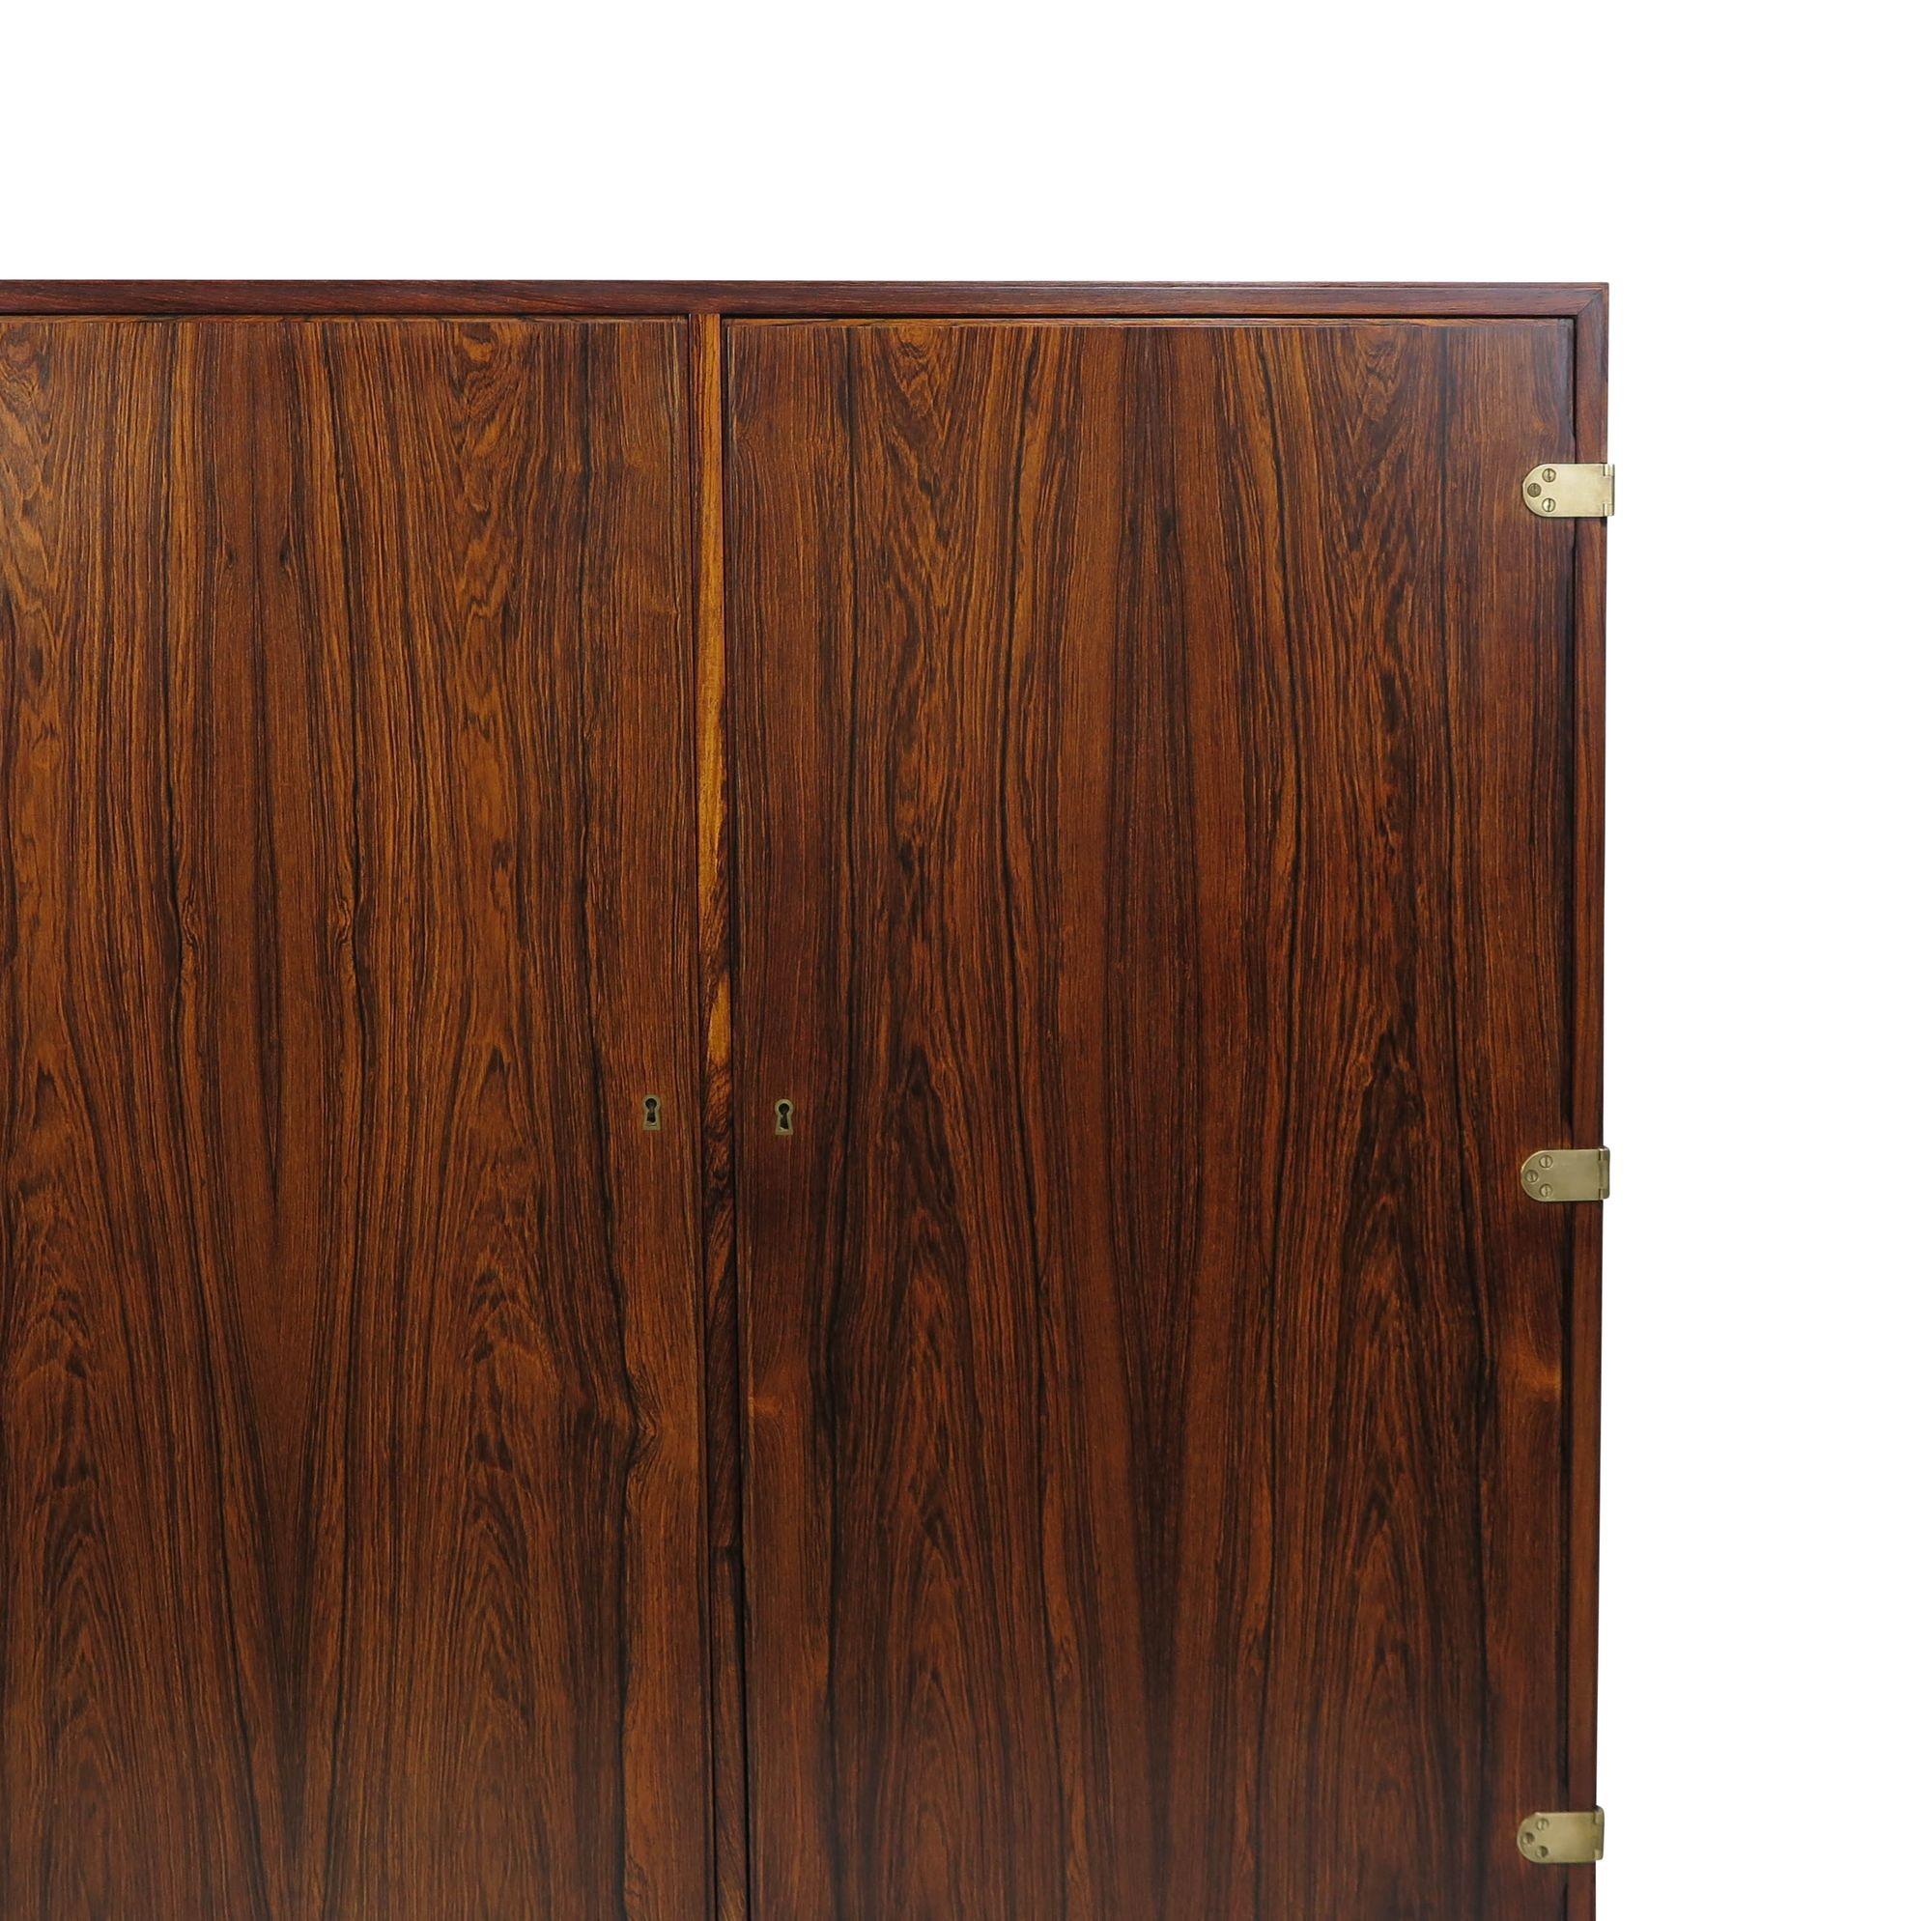 Scandinavian rosewood bar cabinet designed by Børge Mogensen, Denmark, 1948. This handcrafted Brazilian rosewood cabinet showcases meticulous attention to detail with its mitered edges and two locking doors adorned with brass hinges and key. Opening